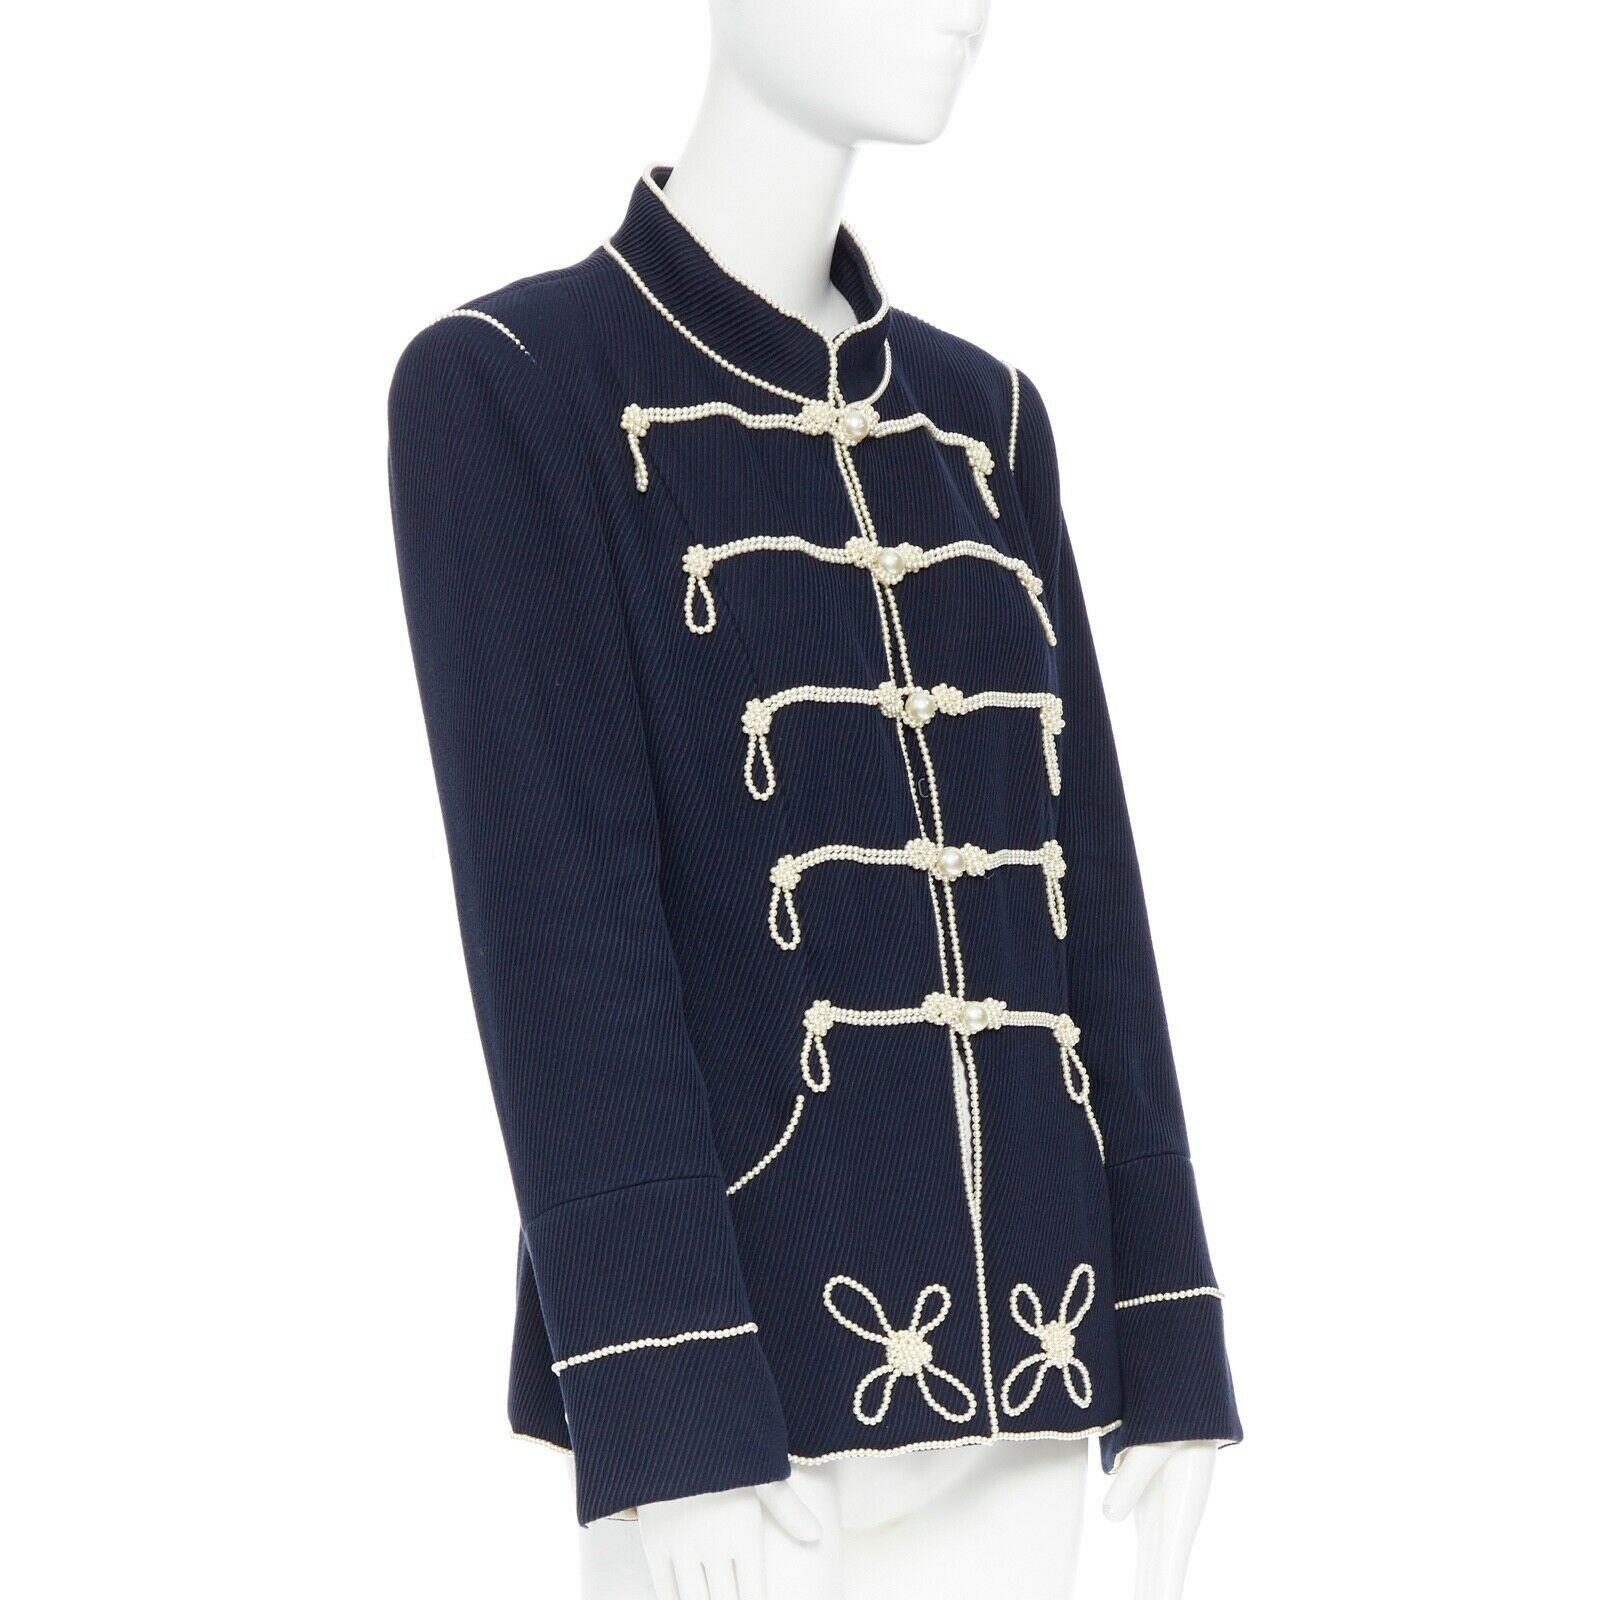 CHANEL 09P navy blue twill trompe loeil white pearl military jacket FR48
Brand: CHANEL
Designer: Karl Lagerfeld
Collection: 09P
Model Name / Style: Military jacket
Material: Other; composition lanel removed. Feels like cotton twill.
Color: Navy and